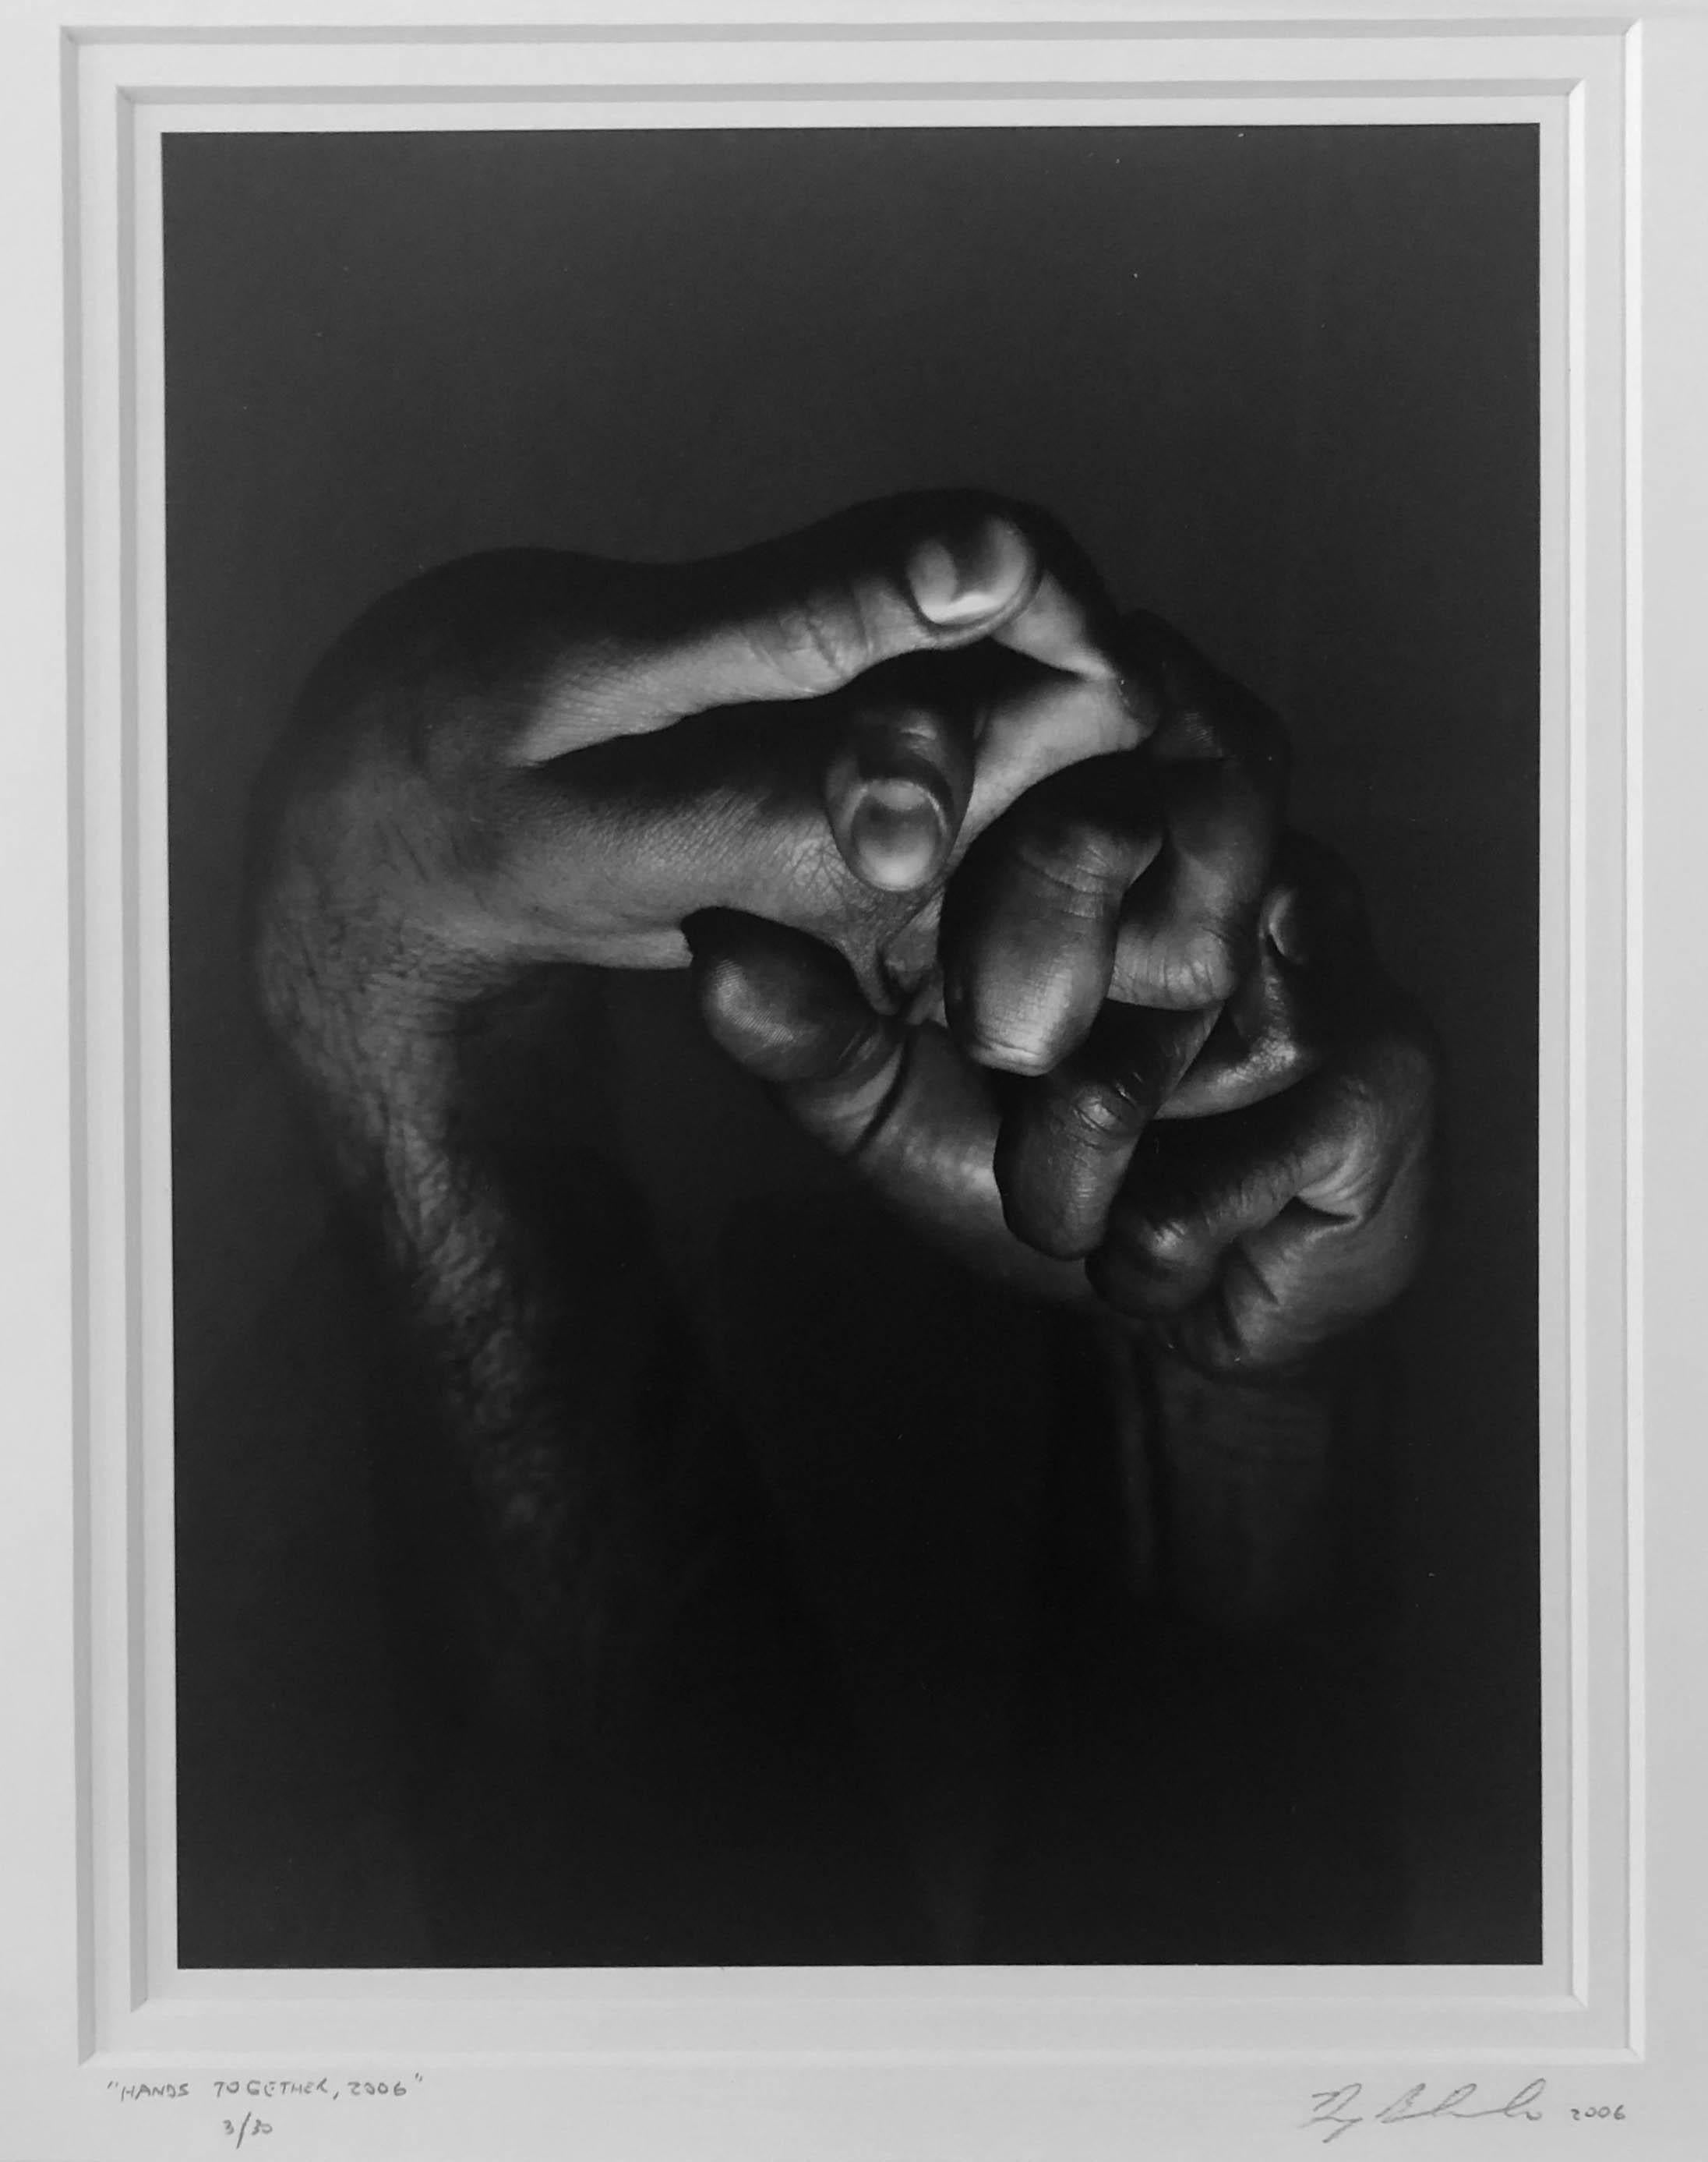 Hands Together - Intertwined Hands, Silver Gelatin Print, Matted and Framed - Photograph by Doug Birkenheuer